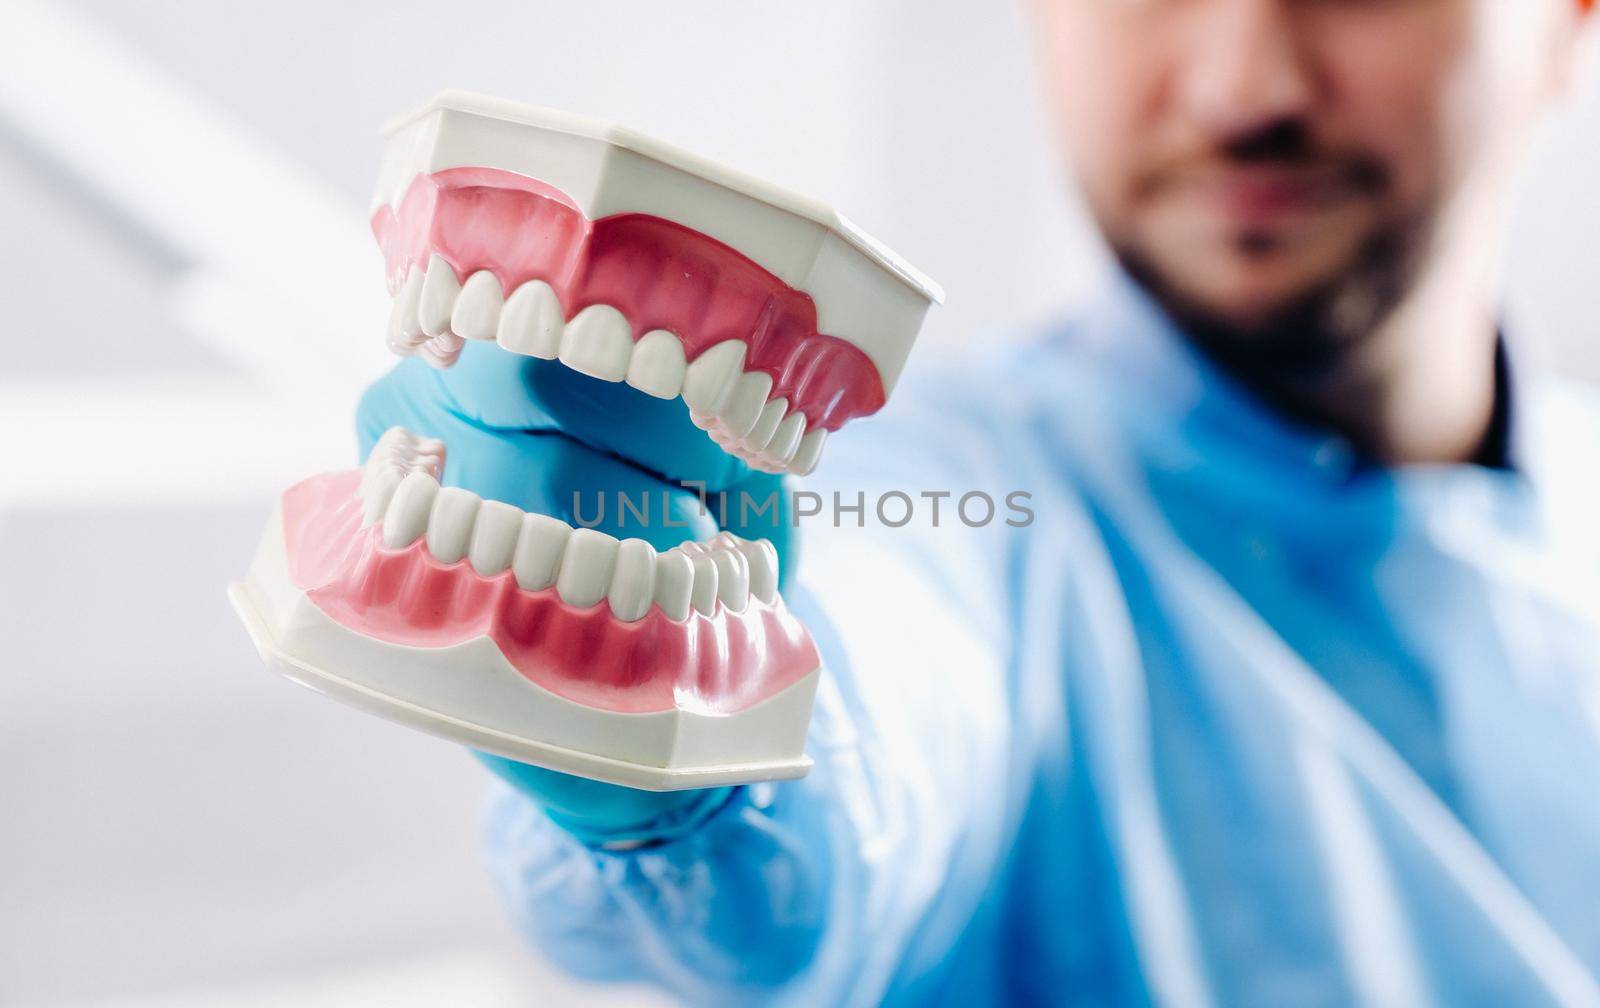 A model of a human jaw with teeth and a toothbrush in the dentist's hand by Lobachad